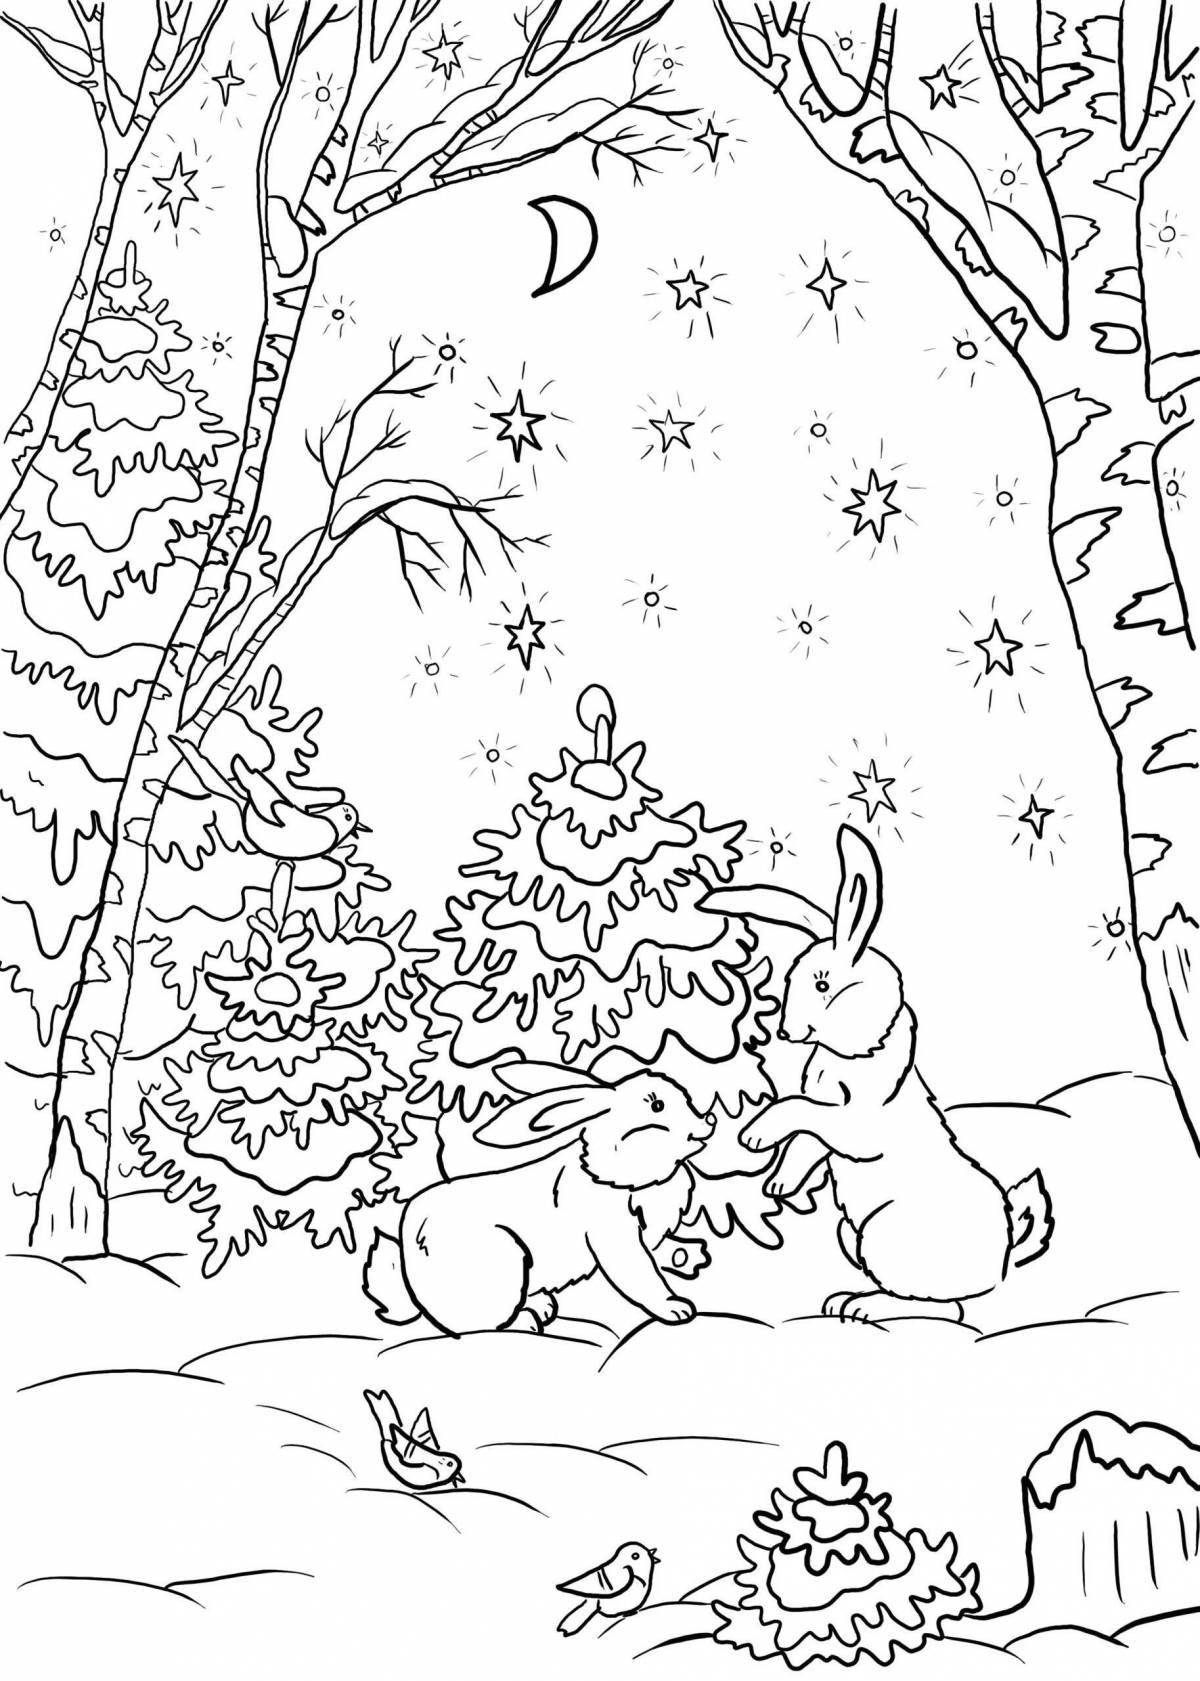 Coloring page peaceful winter forest with animals